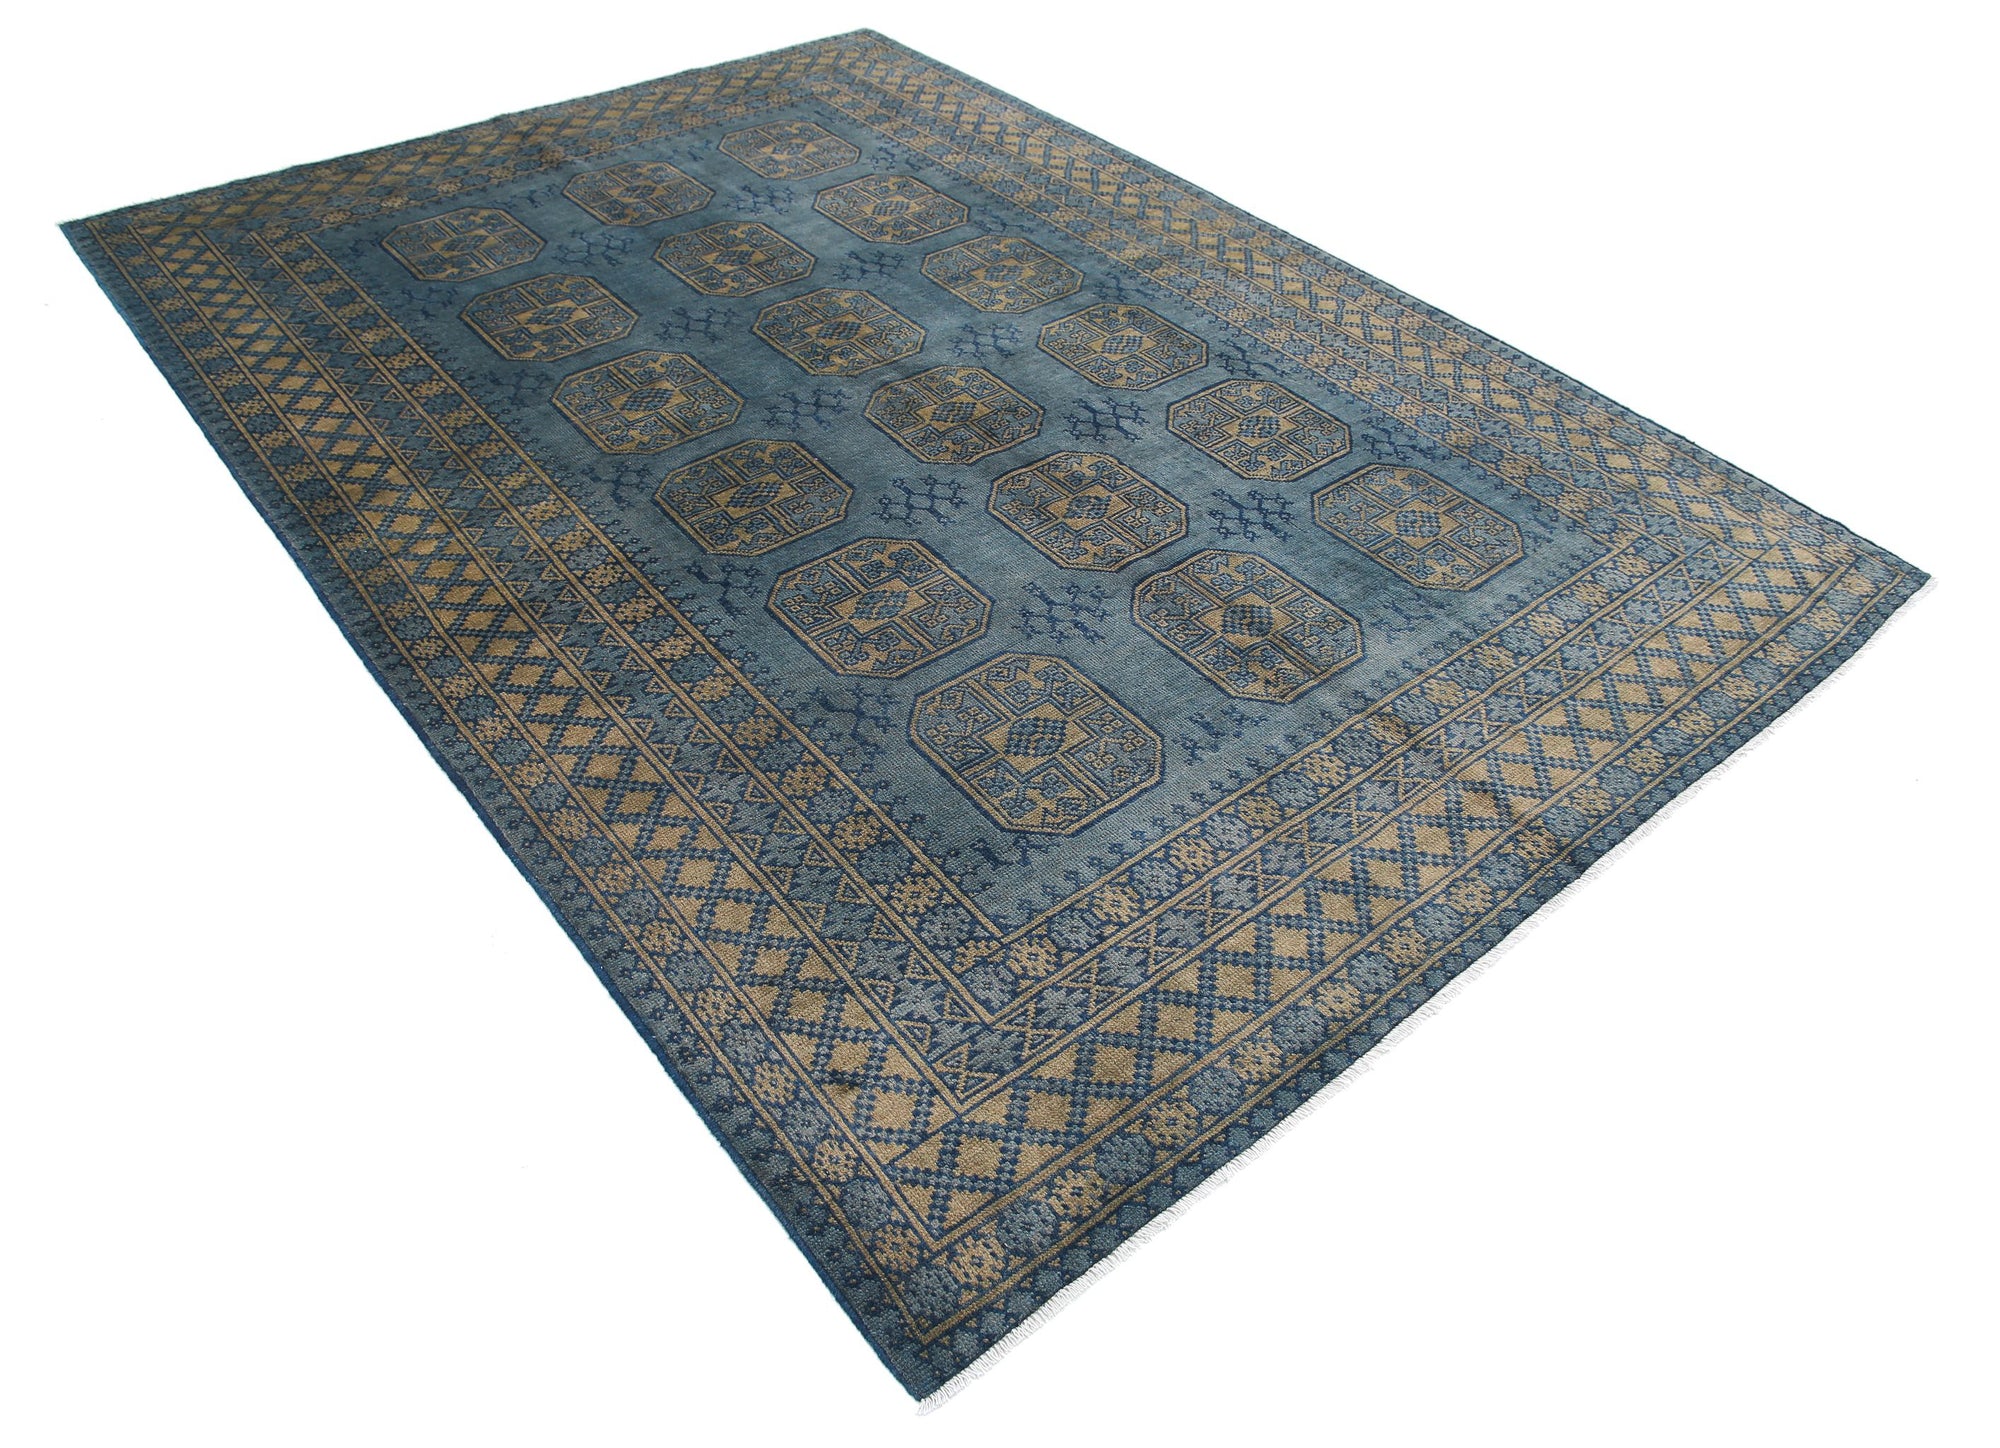 Revival-hand-knotted-gul-collection-wool-rug-5013979-1.jpg